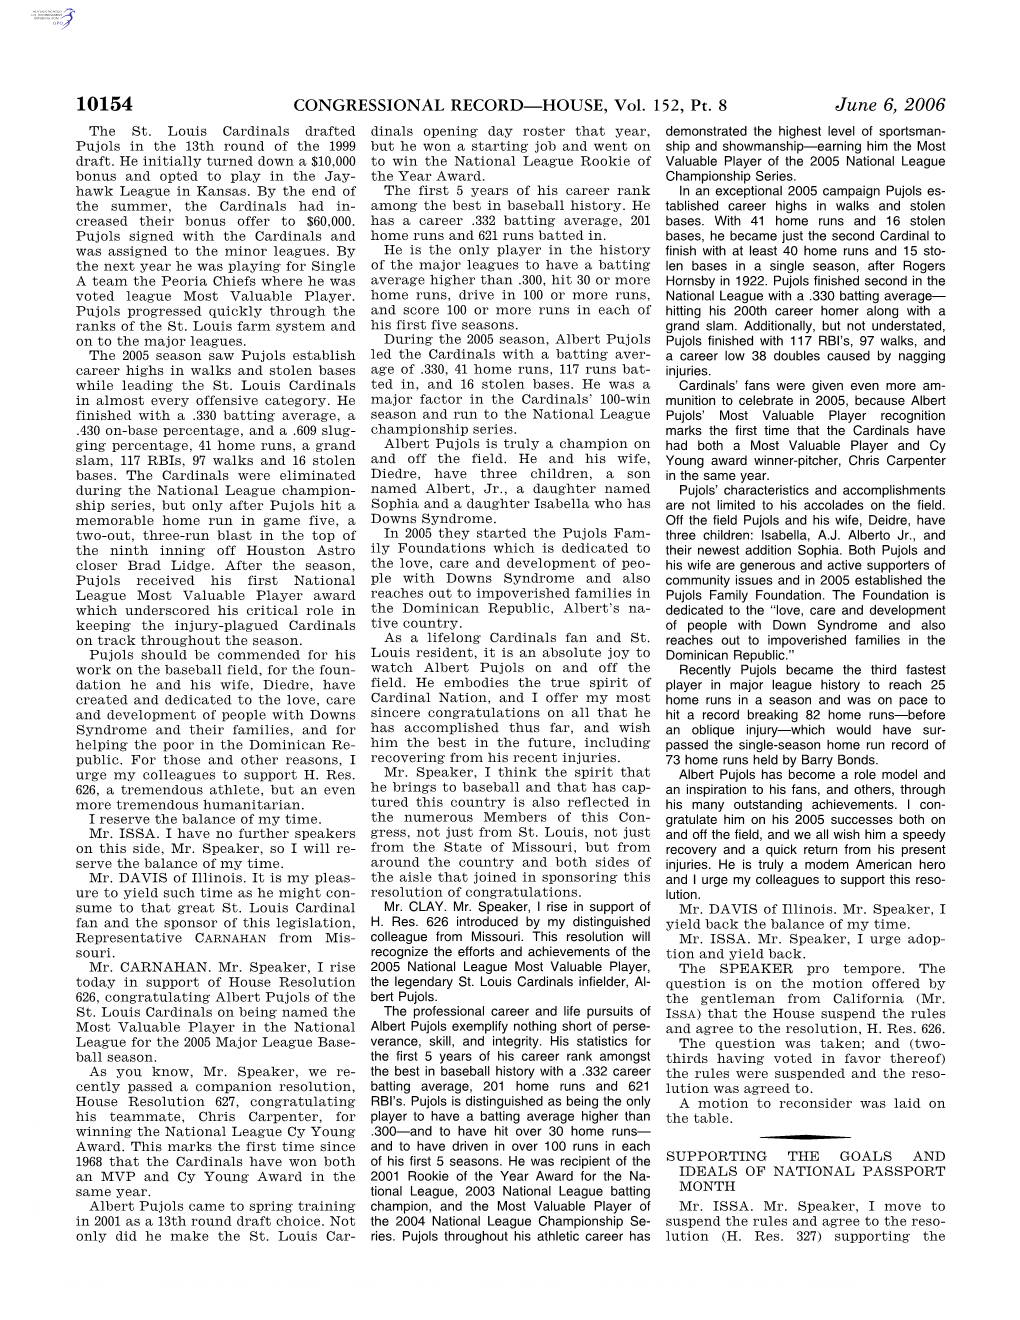 CONGRESSIONAL RECORD—HOUSE, Vol. 152, Pt. 8 June 6, 2006 the St